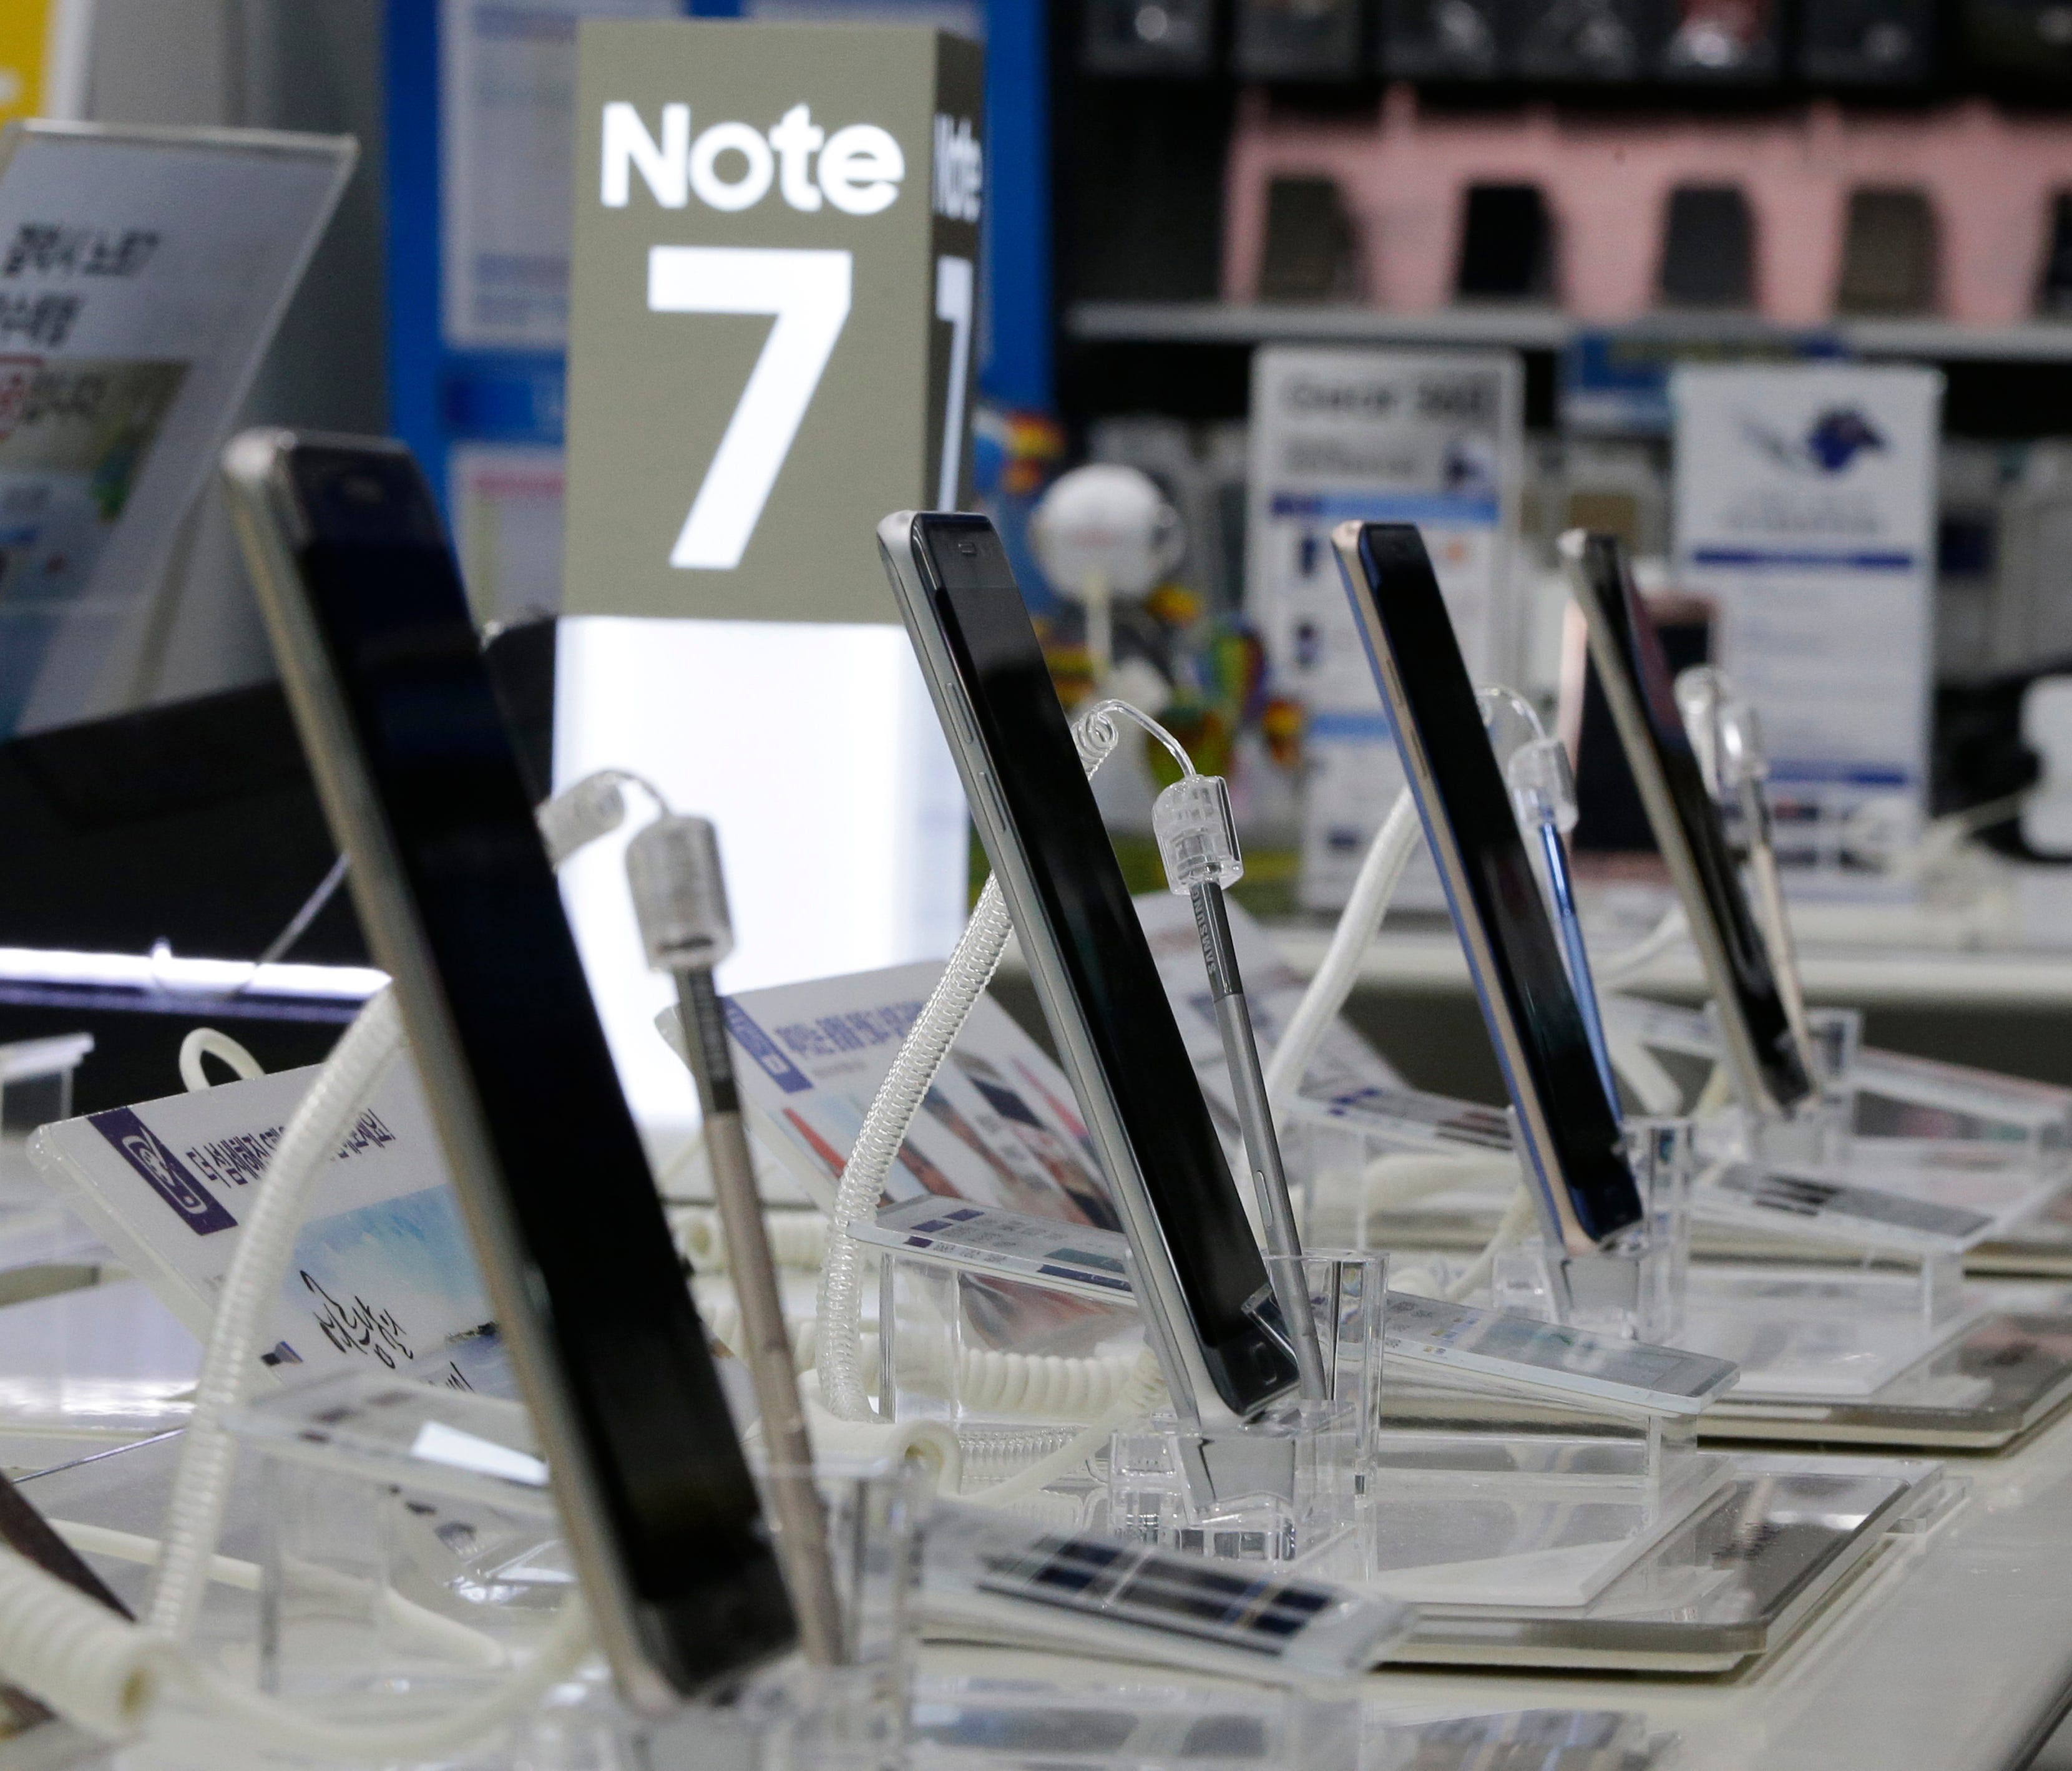 Samsung can't move past the Note 7 fast enough as it readies its next phone.